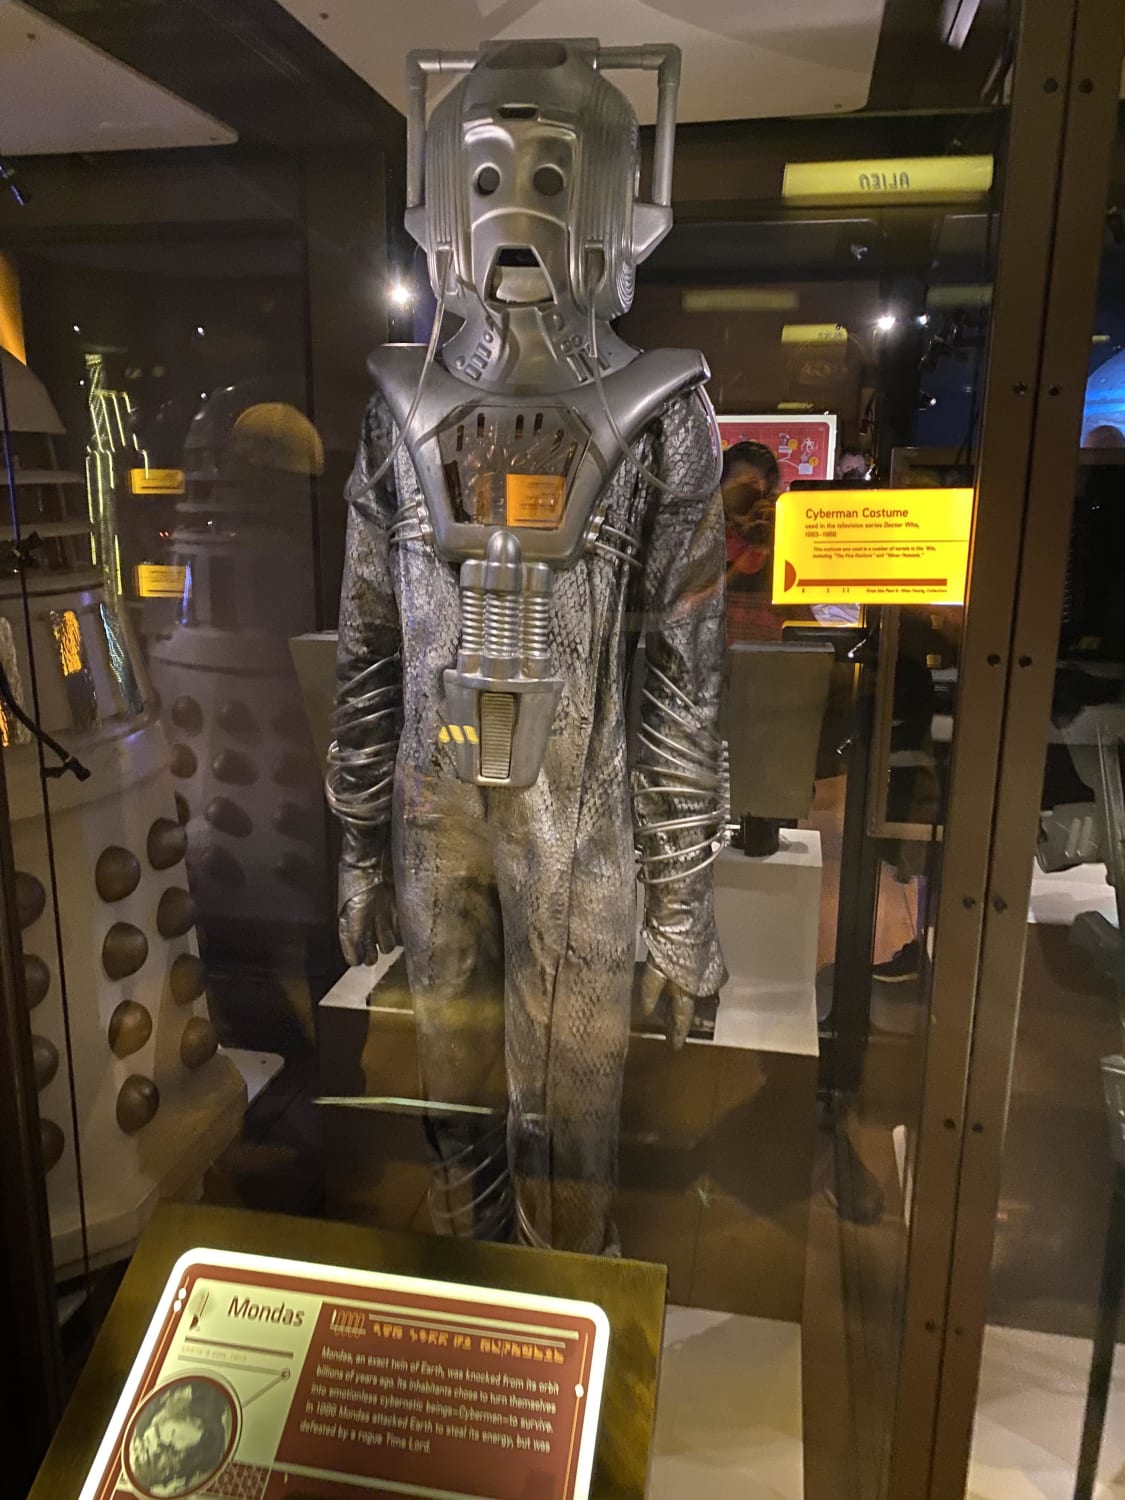 Ran into a Cyberman at the Museum of Pop Culture in Seattle